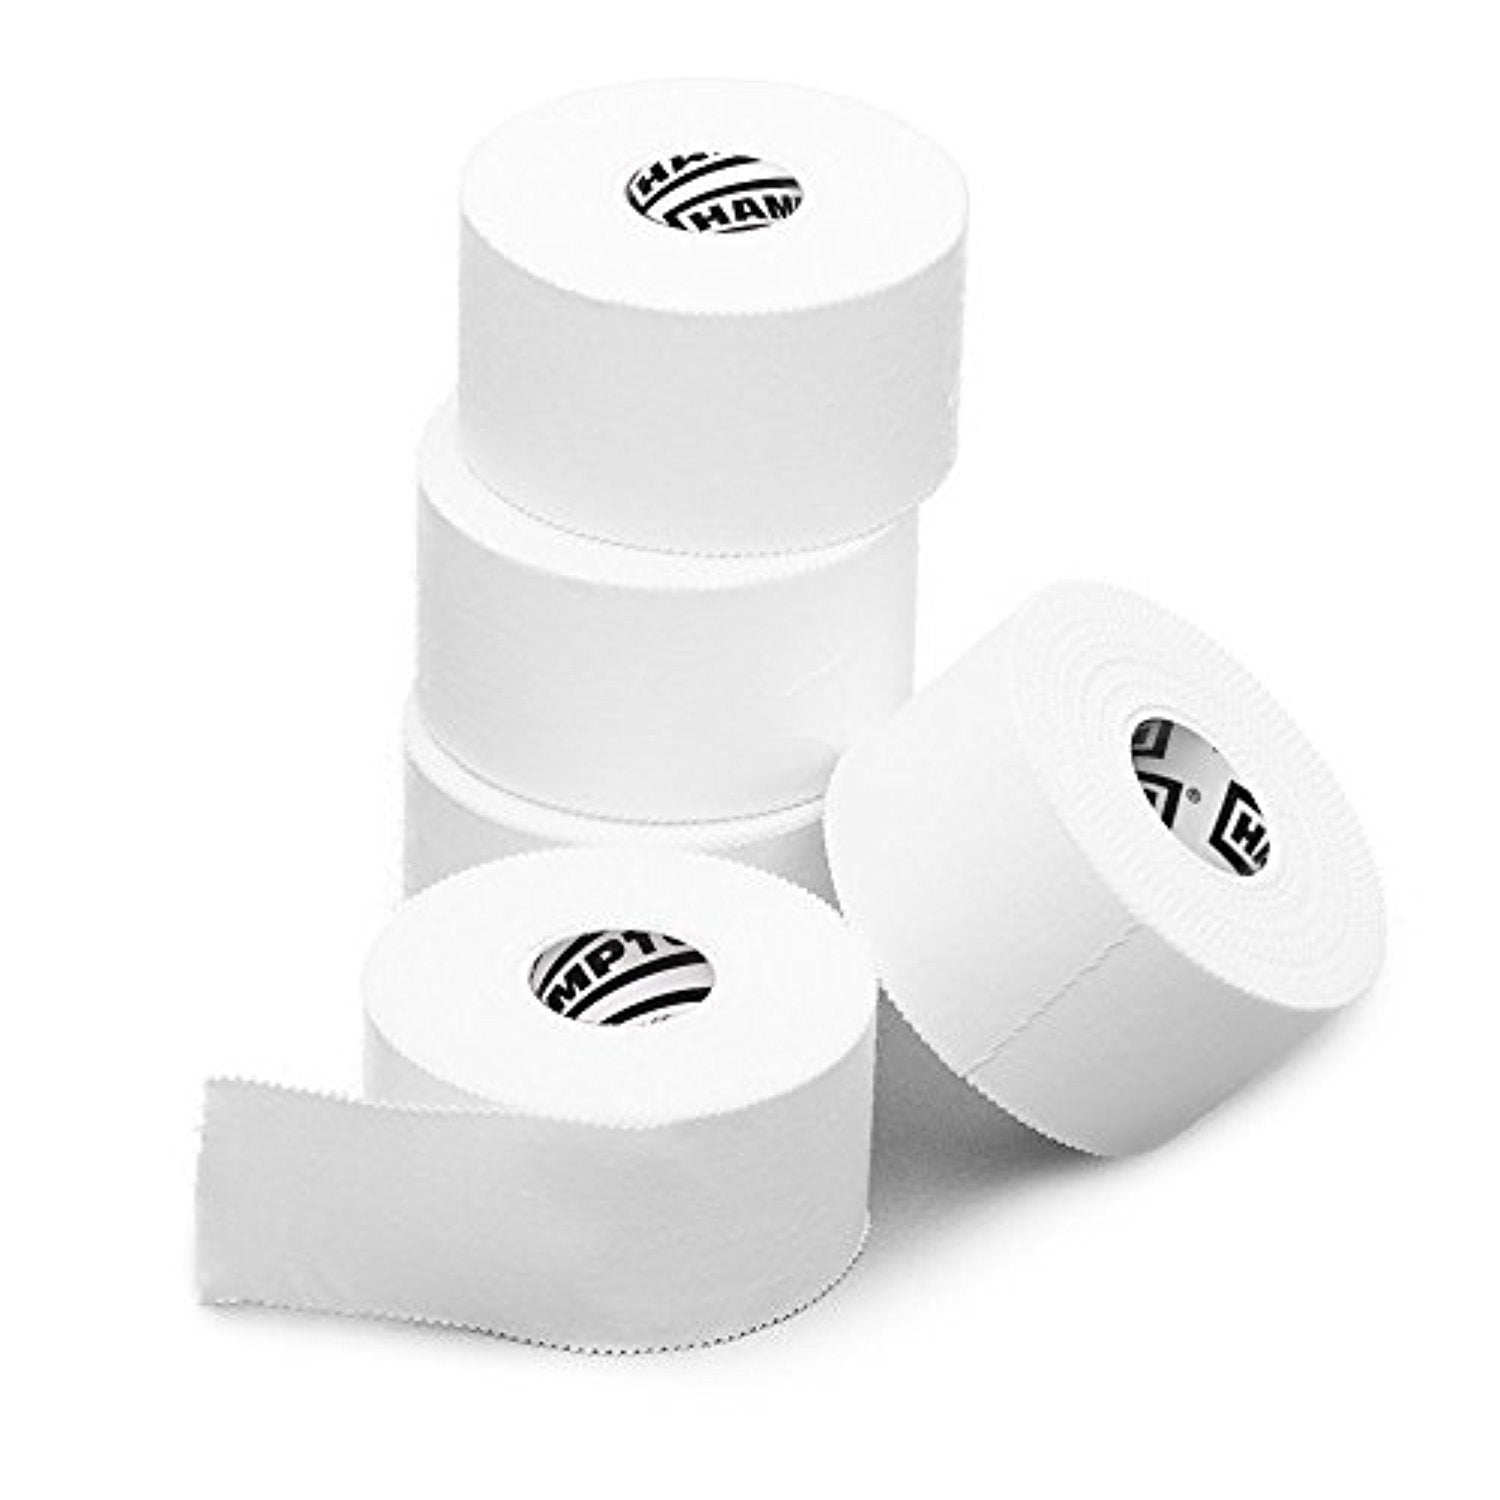 Goat Tape Scary Sticky Premium Athletic/Weightlifting Tape White